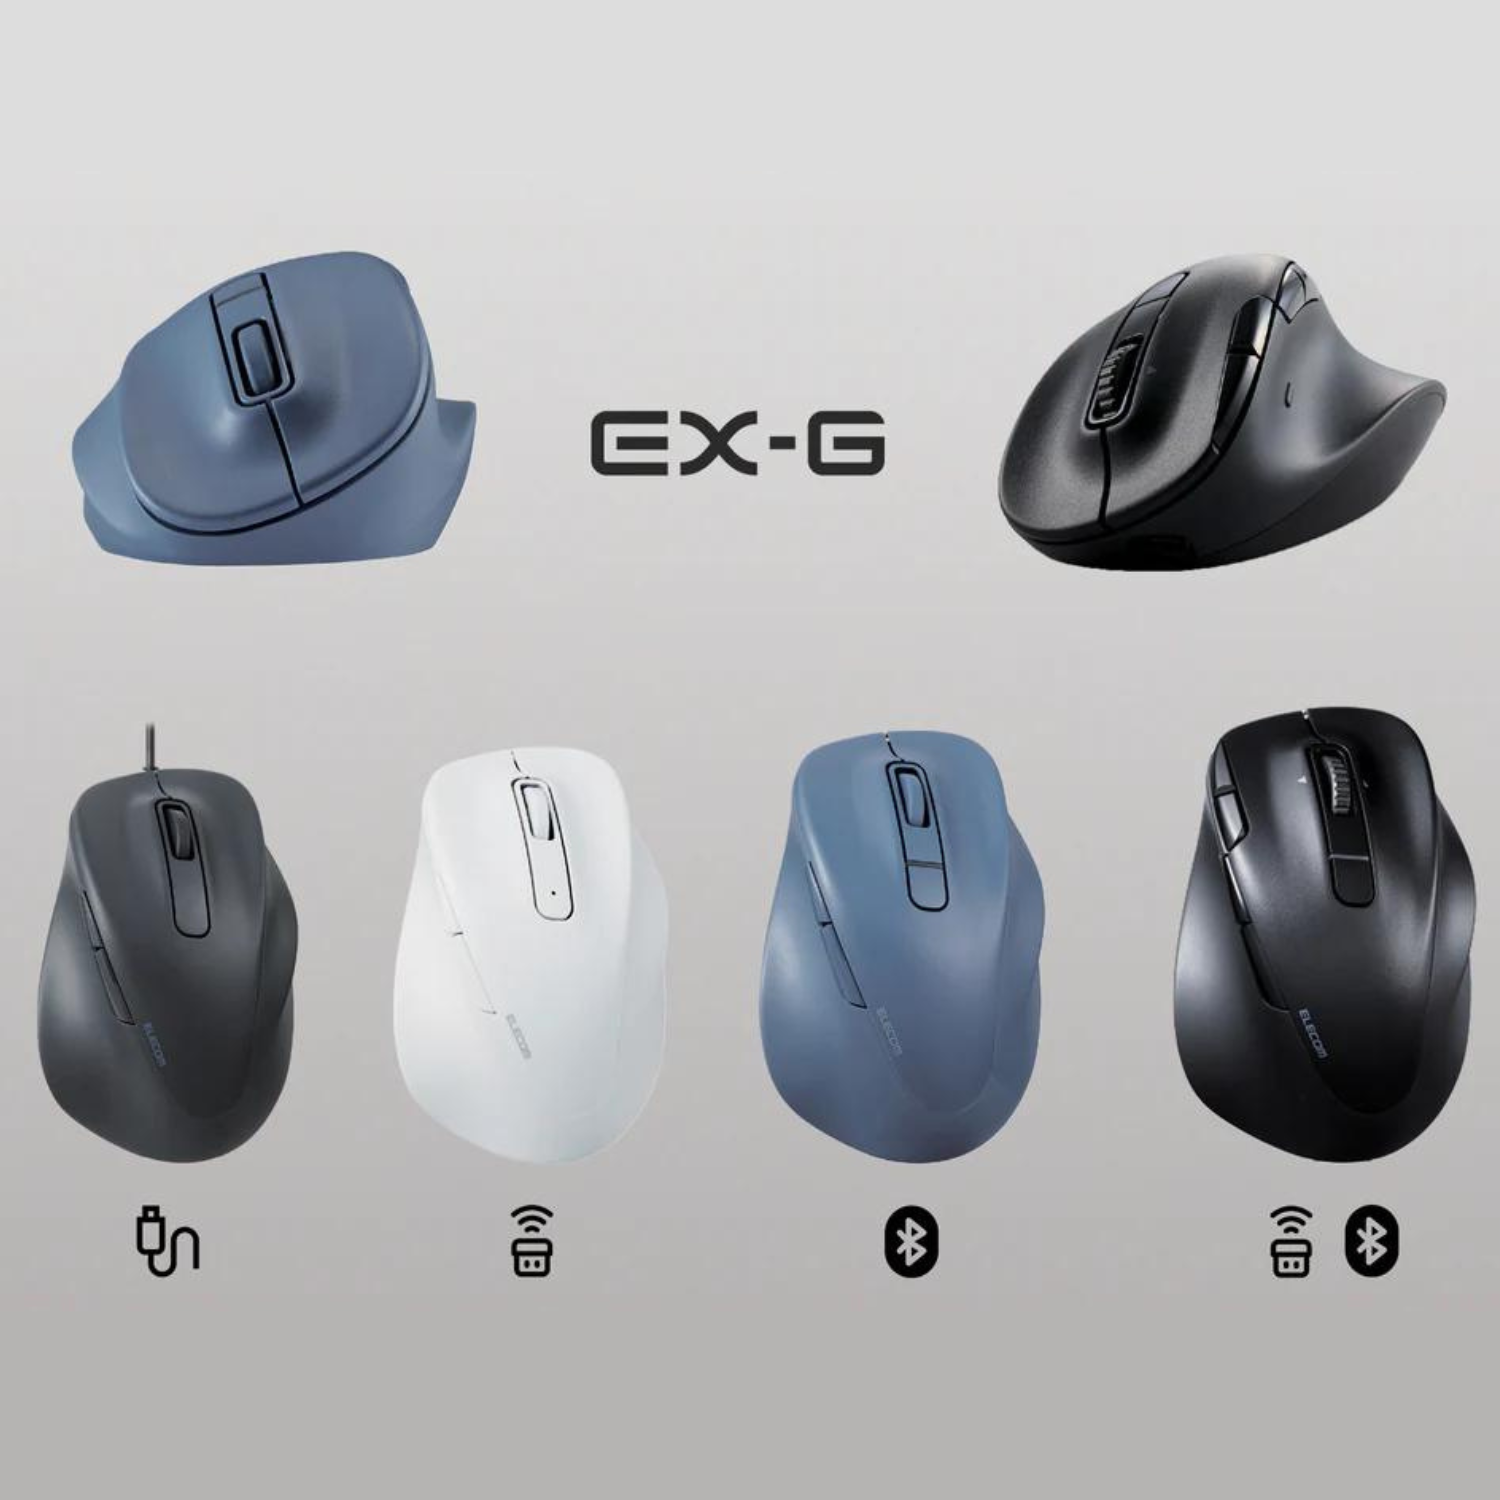 Introducing the EX-G, Ergonomic Mice Designed with Doctors